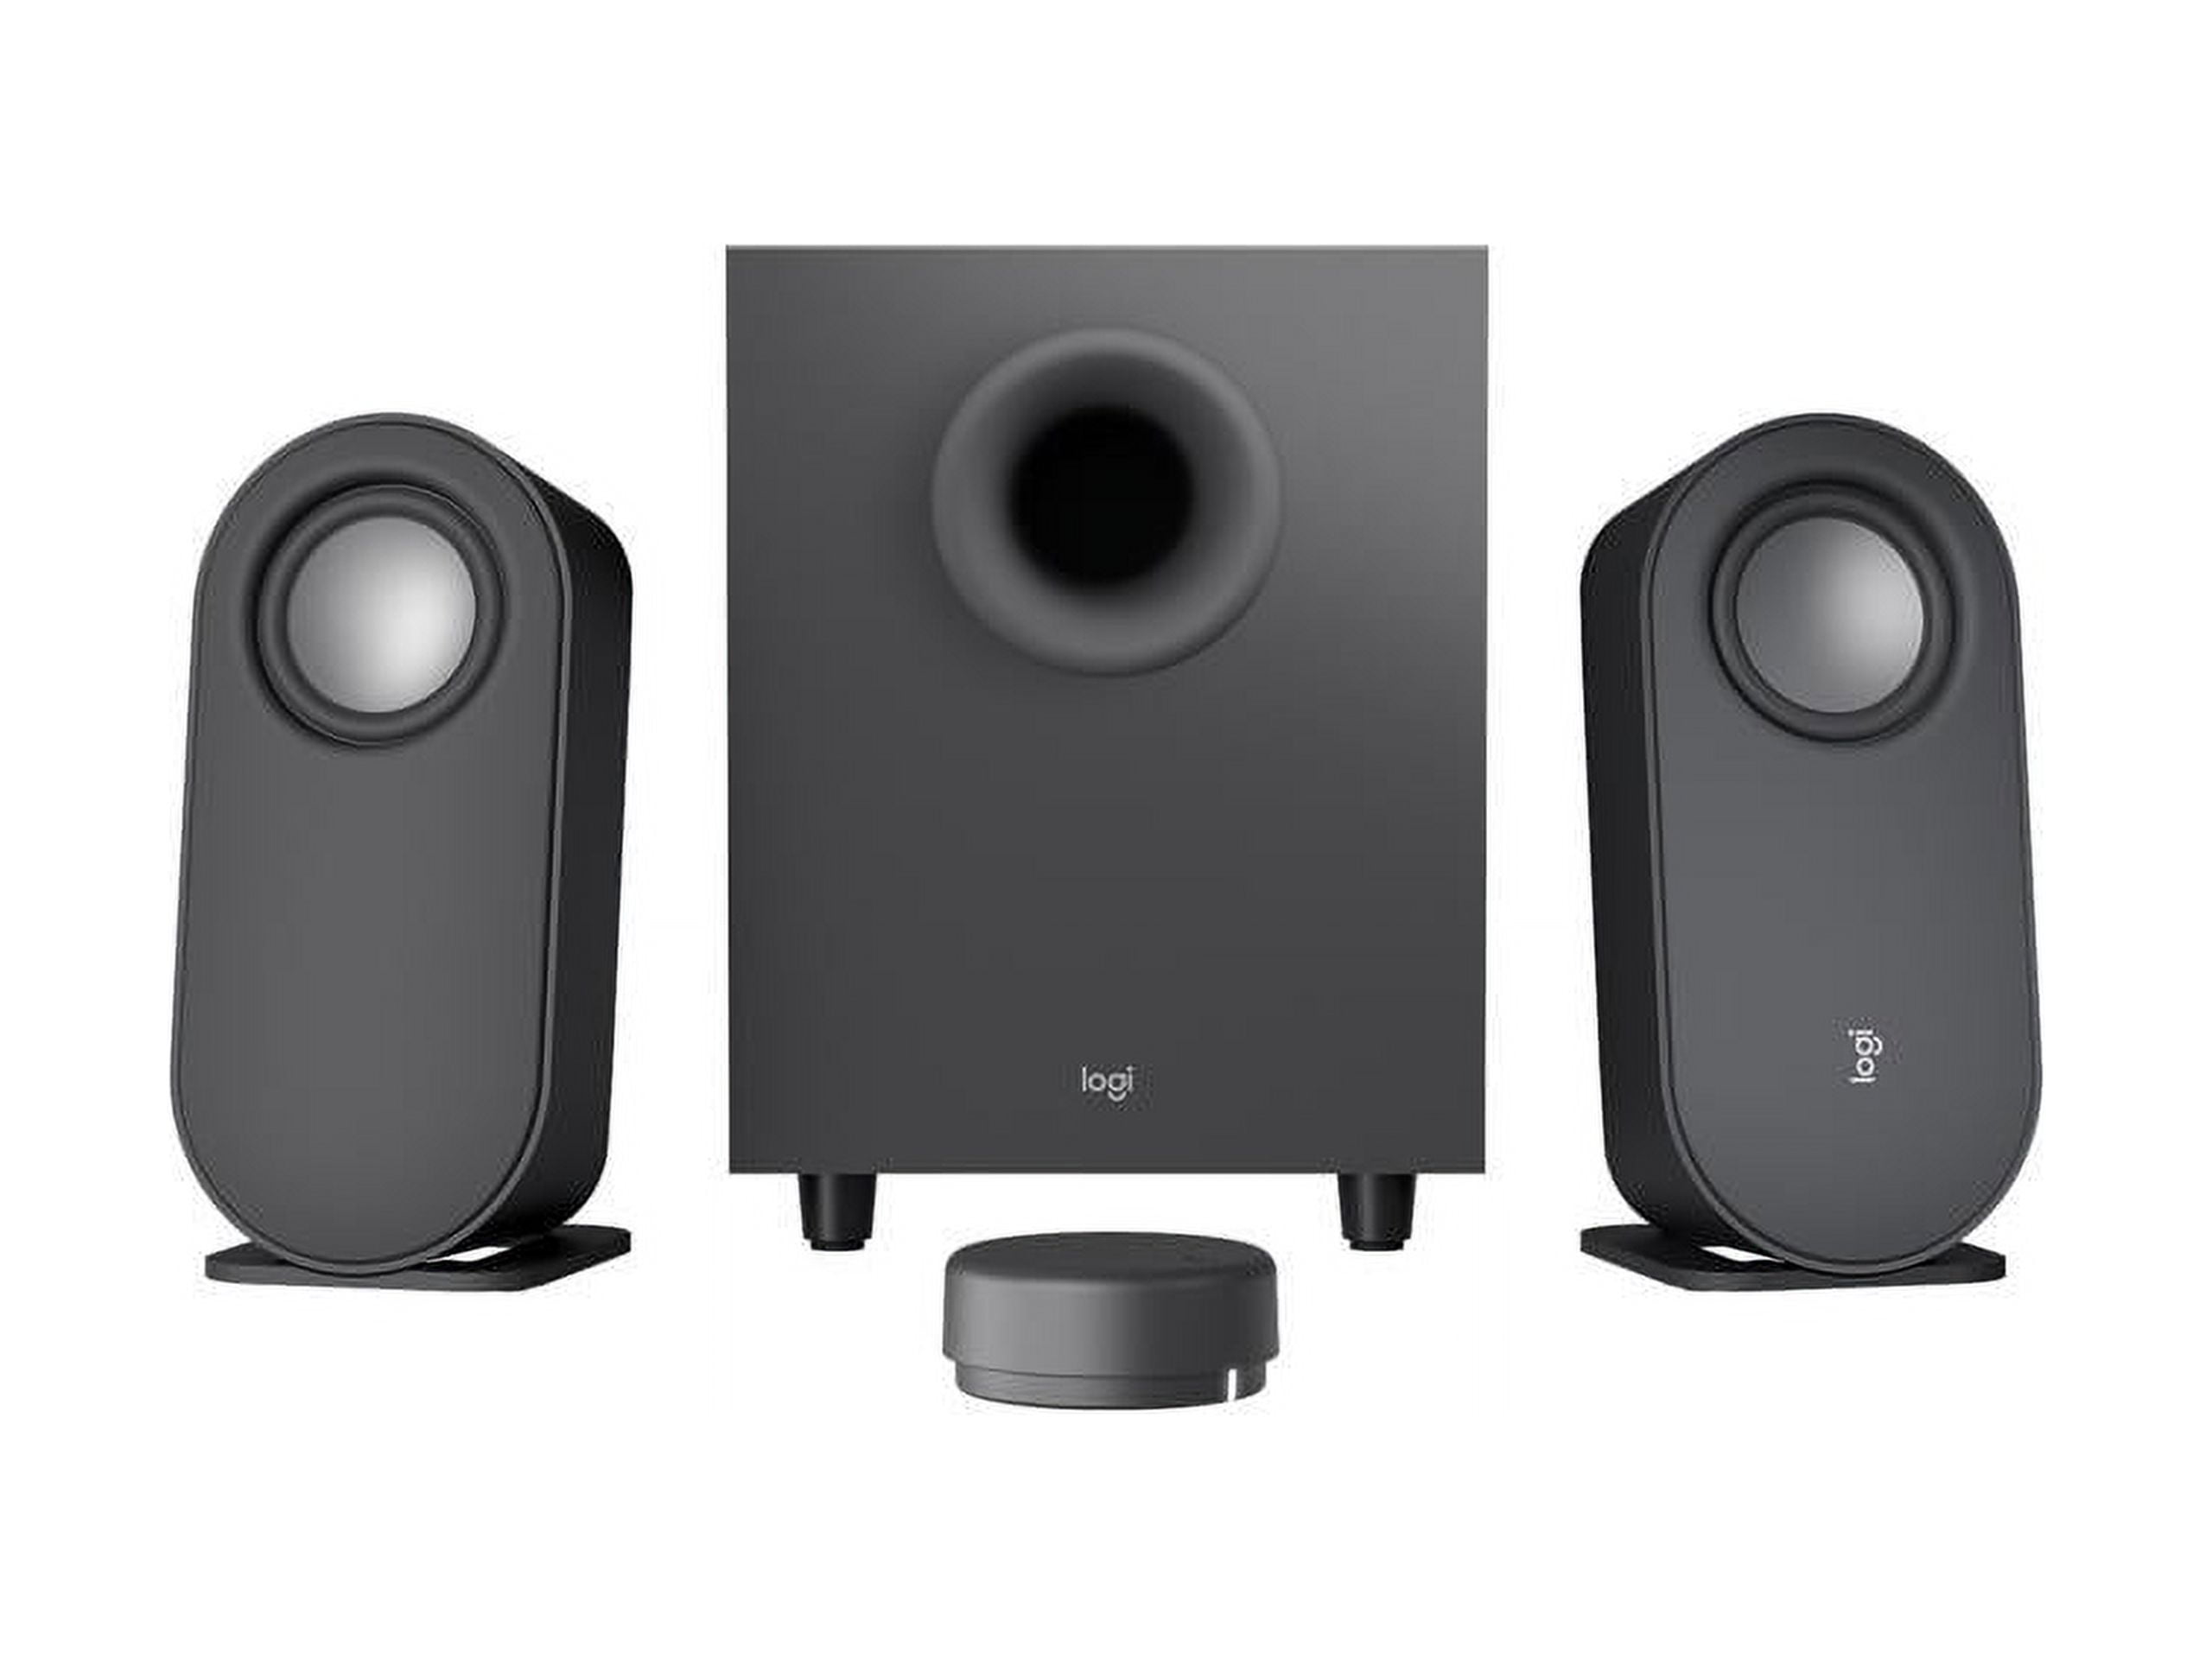 Logitech Z407 Bluetooth Computer Speakers With Subwoofer And Wireless -  Omnidesk